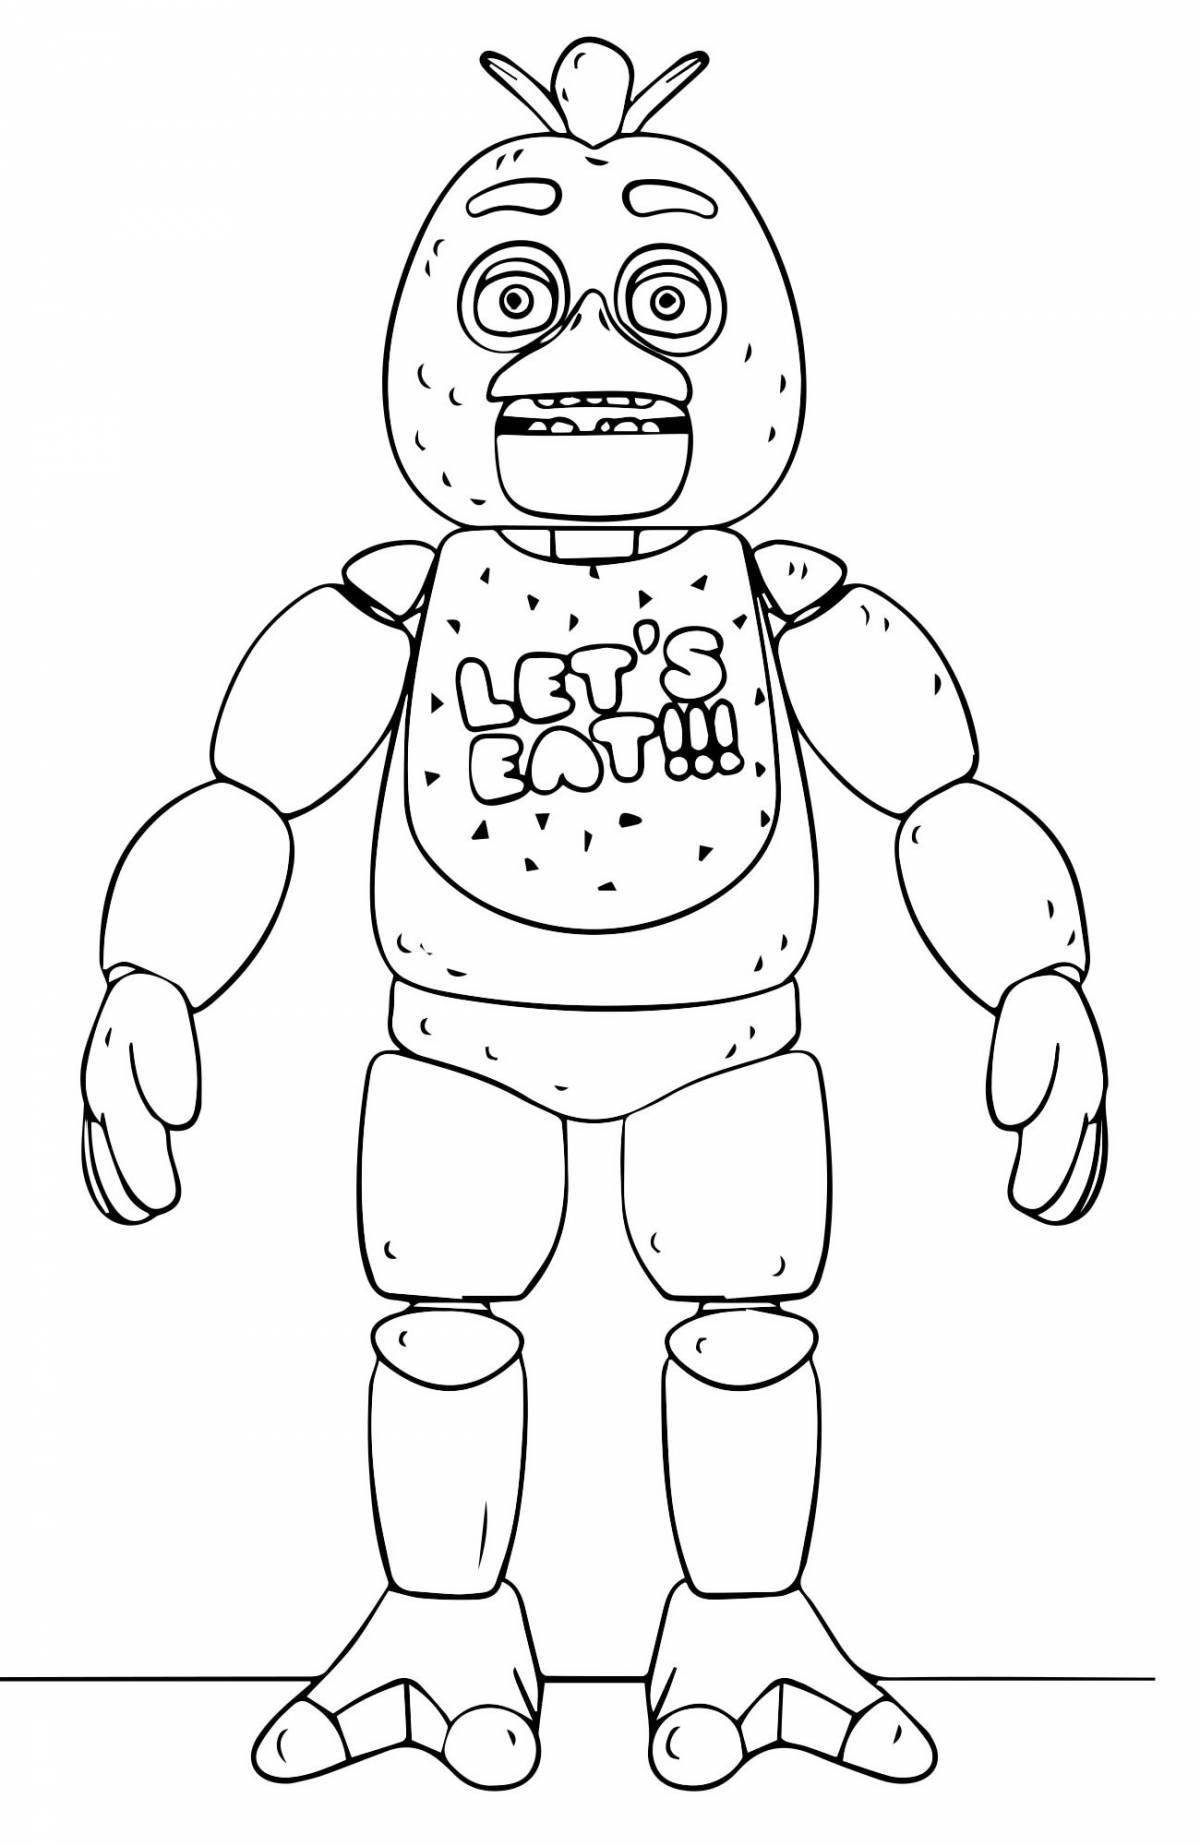 Chica's humorous coloring book